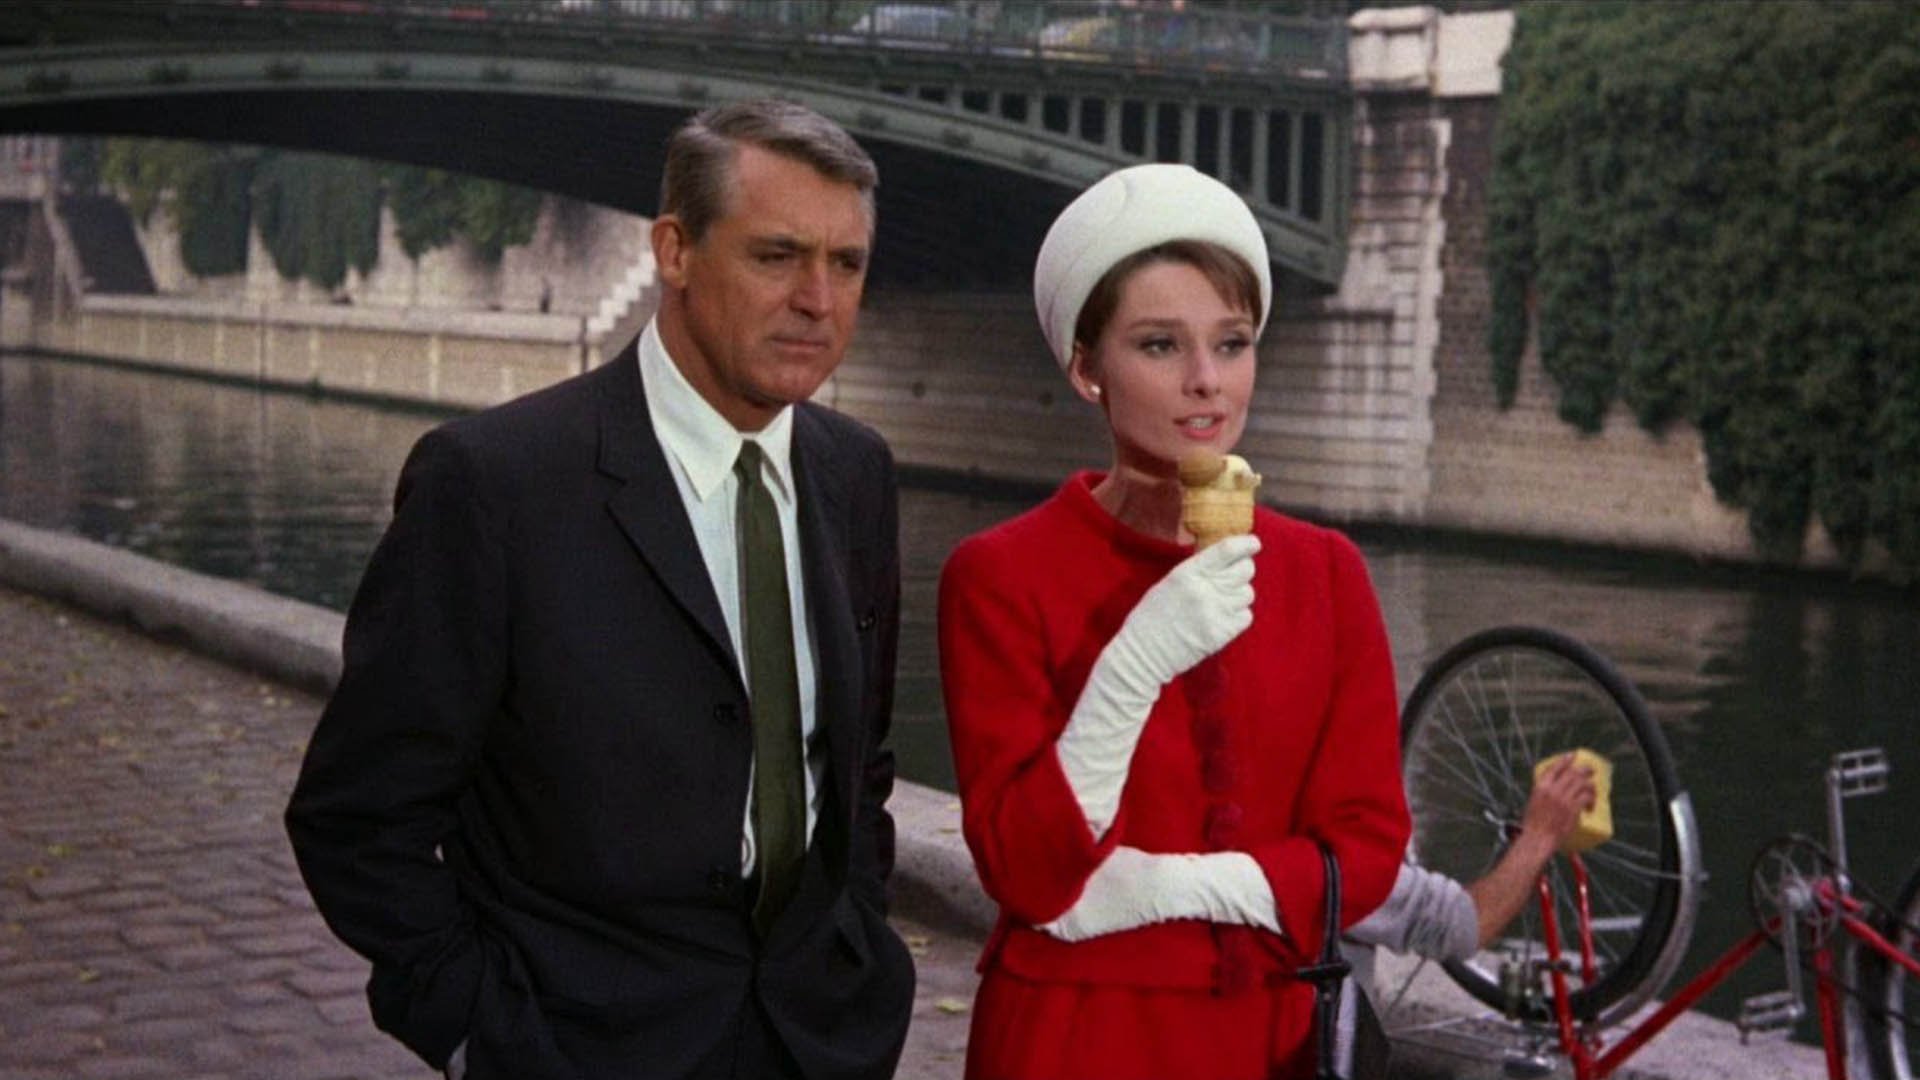 Audrey Hepburn and Carrie Grant walk by the water in Charade